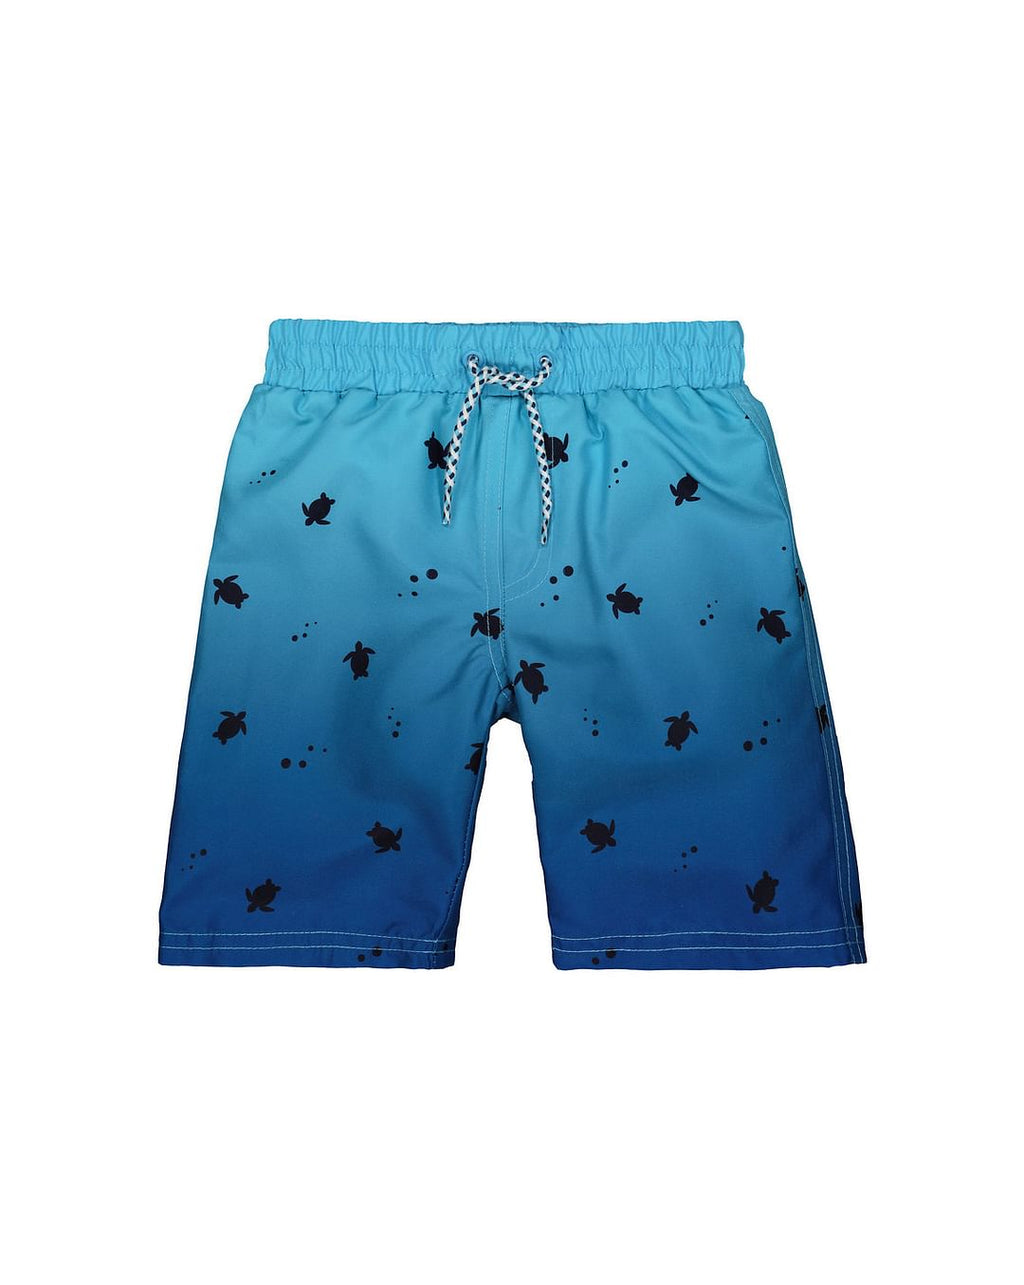 The Beach Company India - Buy printed kids swimwear online at low prices - Blue Ombre Turtle Board Shorts - swim short for boys - young boys swimming shorts